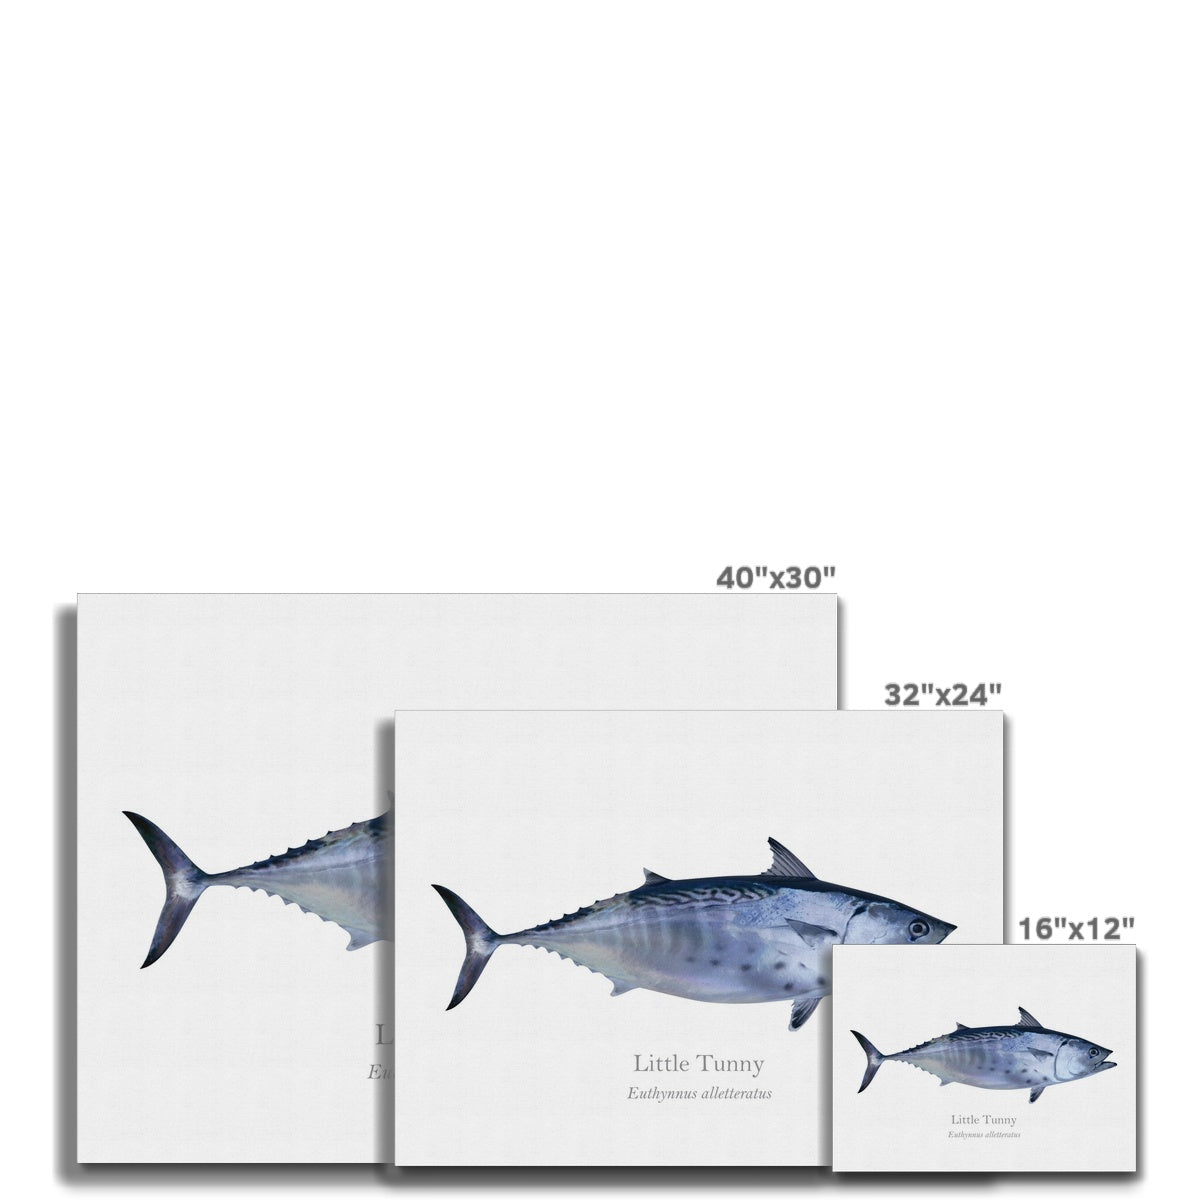 Little Tunny - Canvas Print - With Scientific Name - madfishlab.com